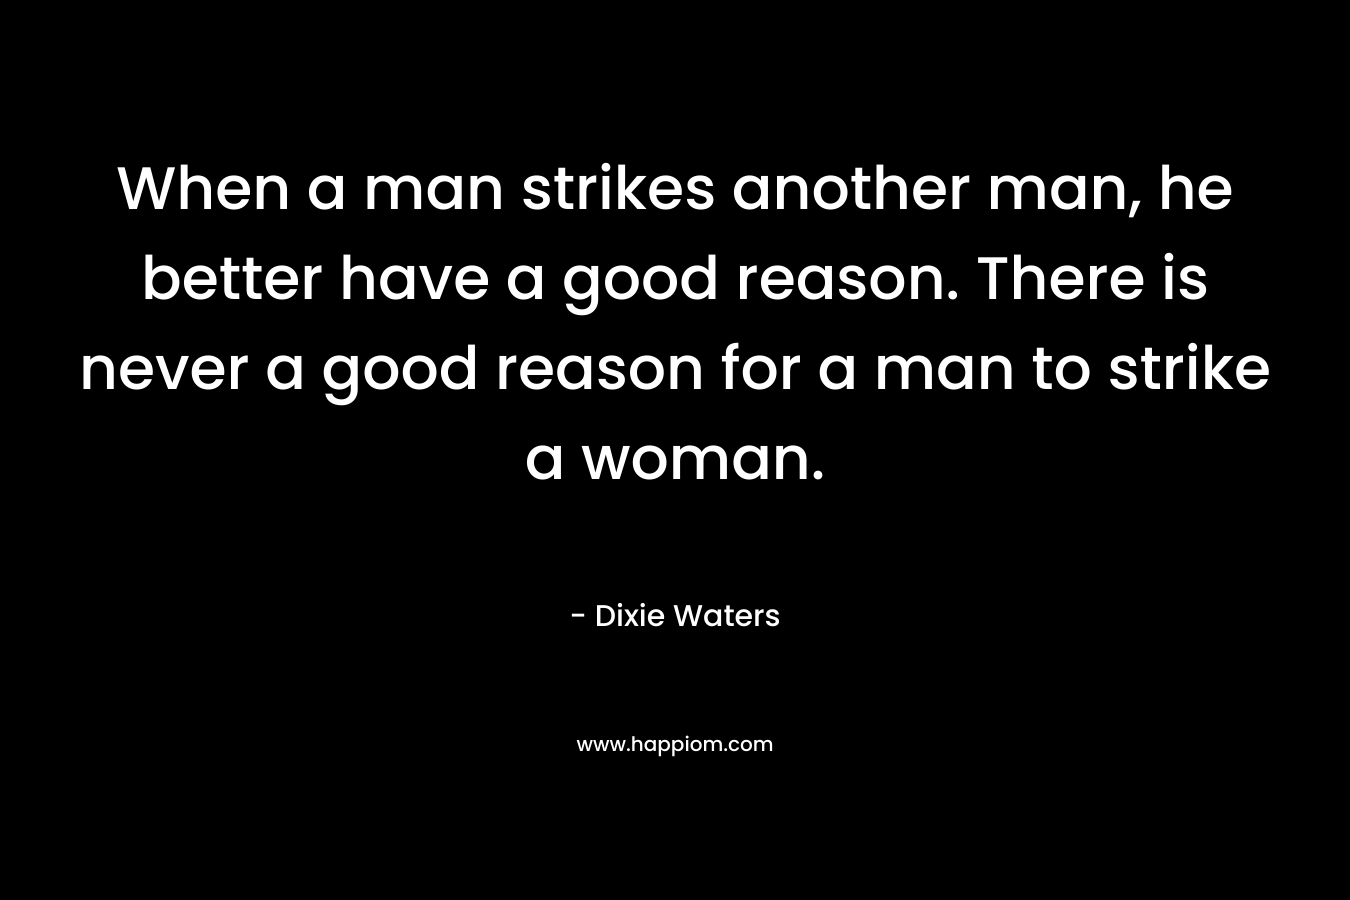 When a man strikes another man, he better have a good reason. There is never a good reason for a man to strike a woman. – Dixie Waters